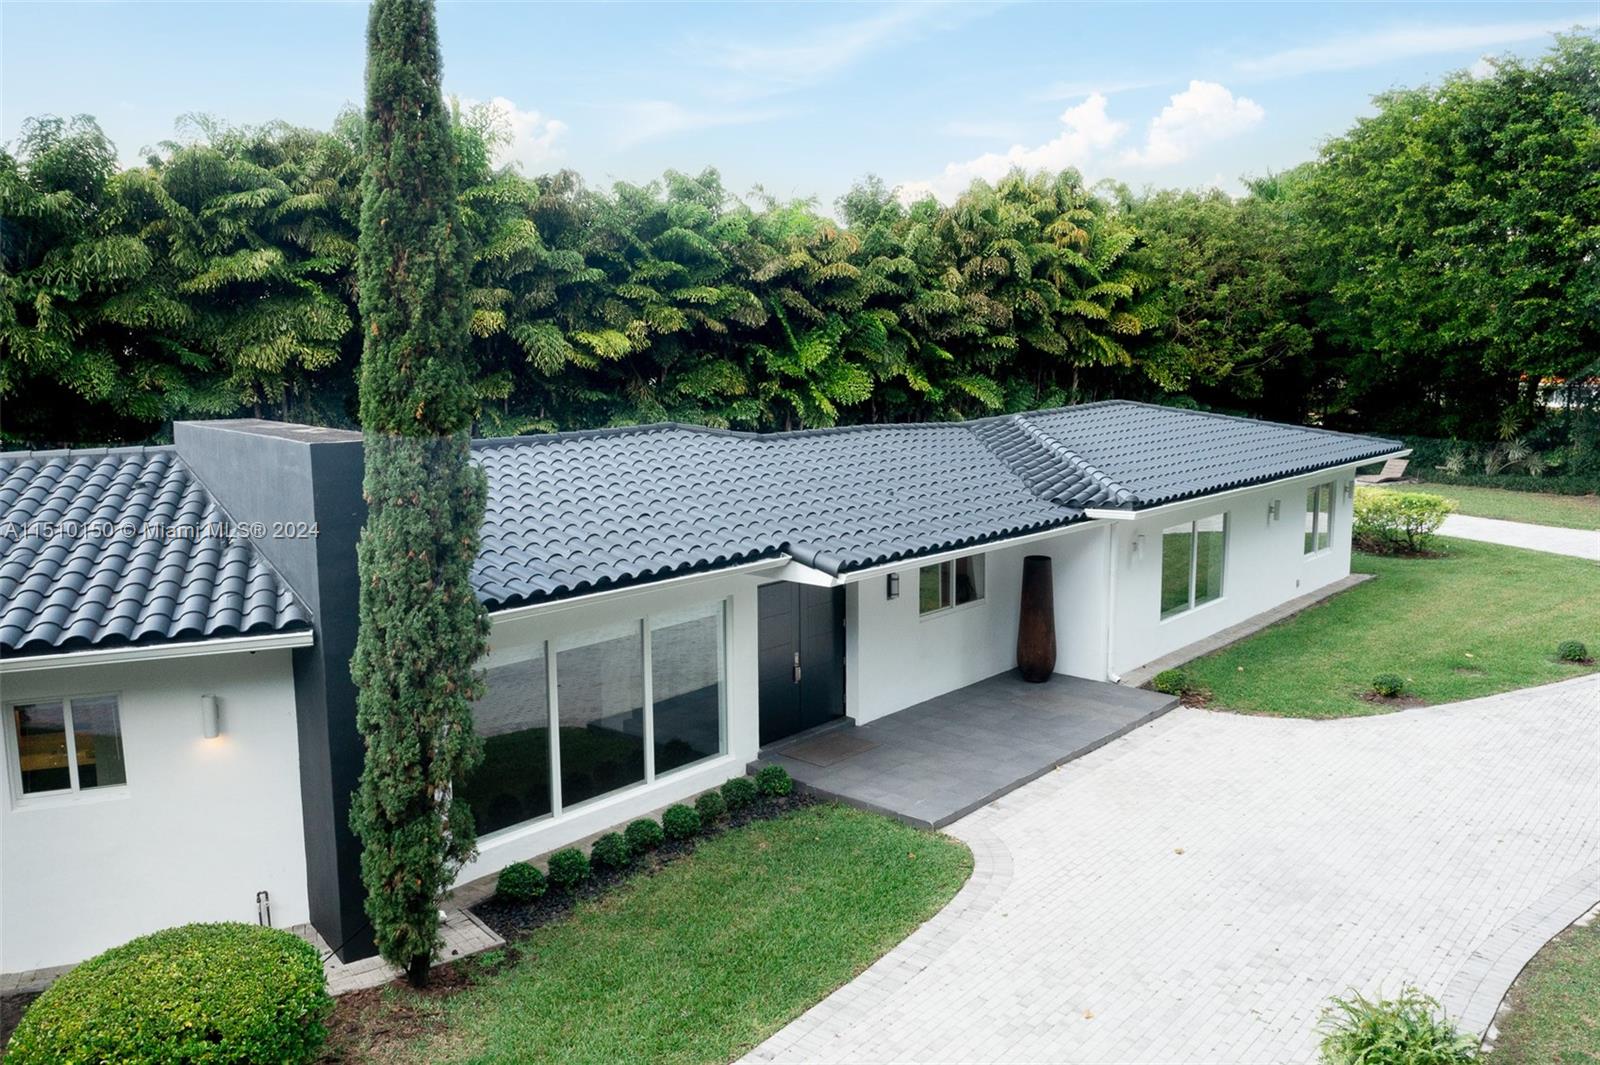 8650 Old Cutler Rd, Coral Gables, Florida 33143, 4 Bedrooms Bedrooms, ,3 BathroomsBathrooms,Residentiallease,For Rent,8650 Old Cutler Rd,A11510150